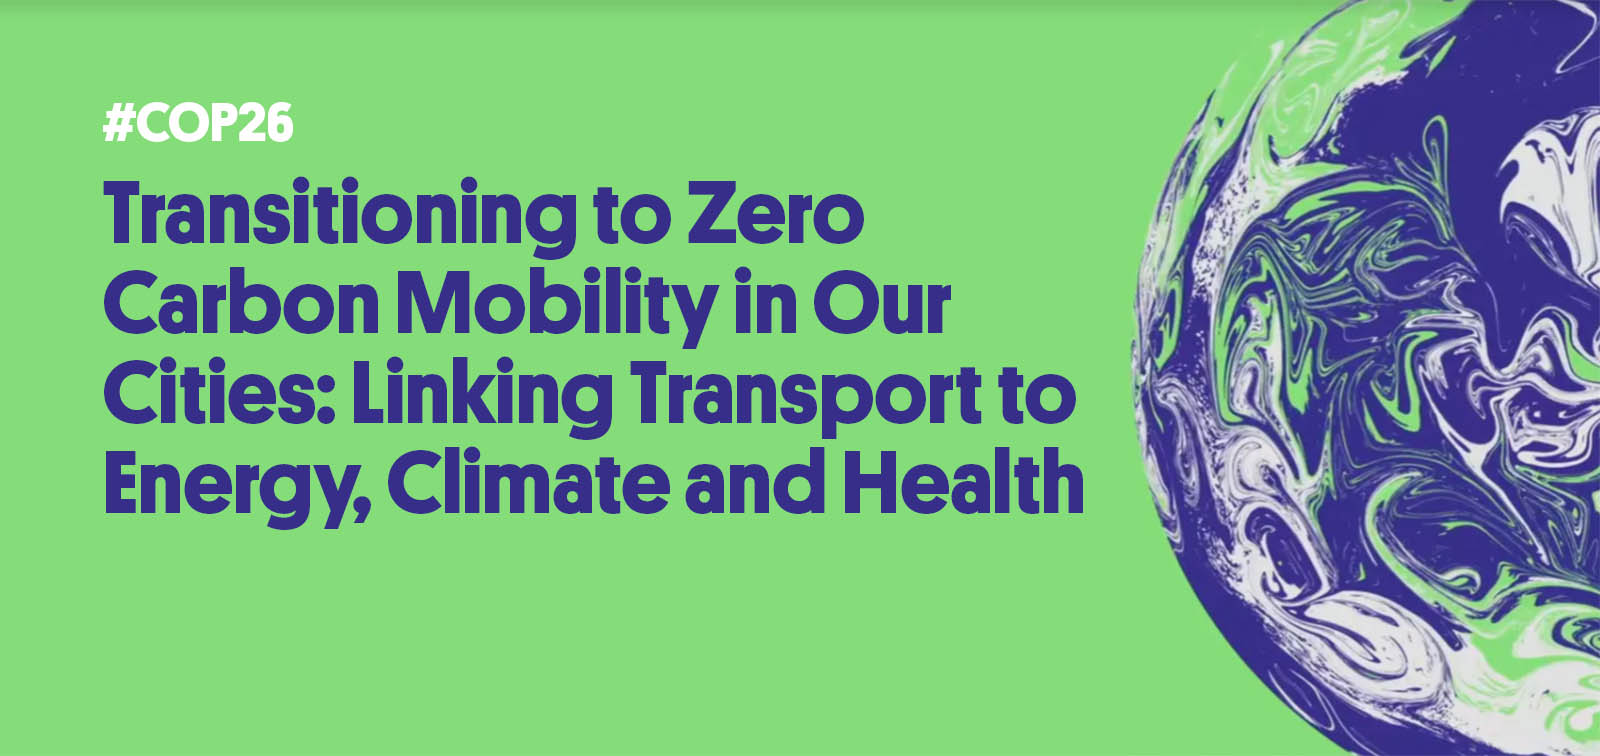 COP26: Transitioning to Zero Carbon Mobility in Our Cities: Linking Transport to Energy, Climate and Health